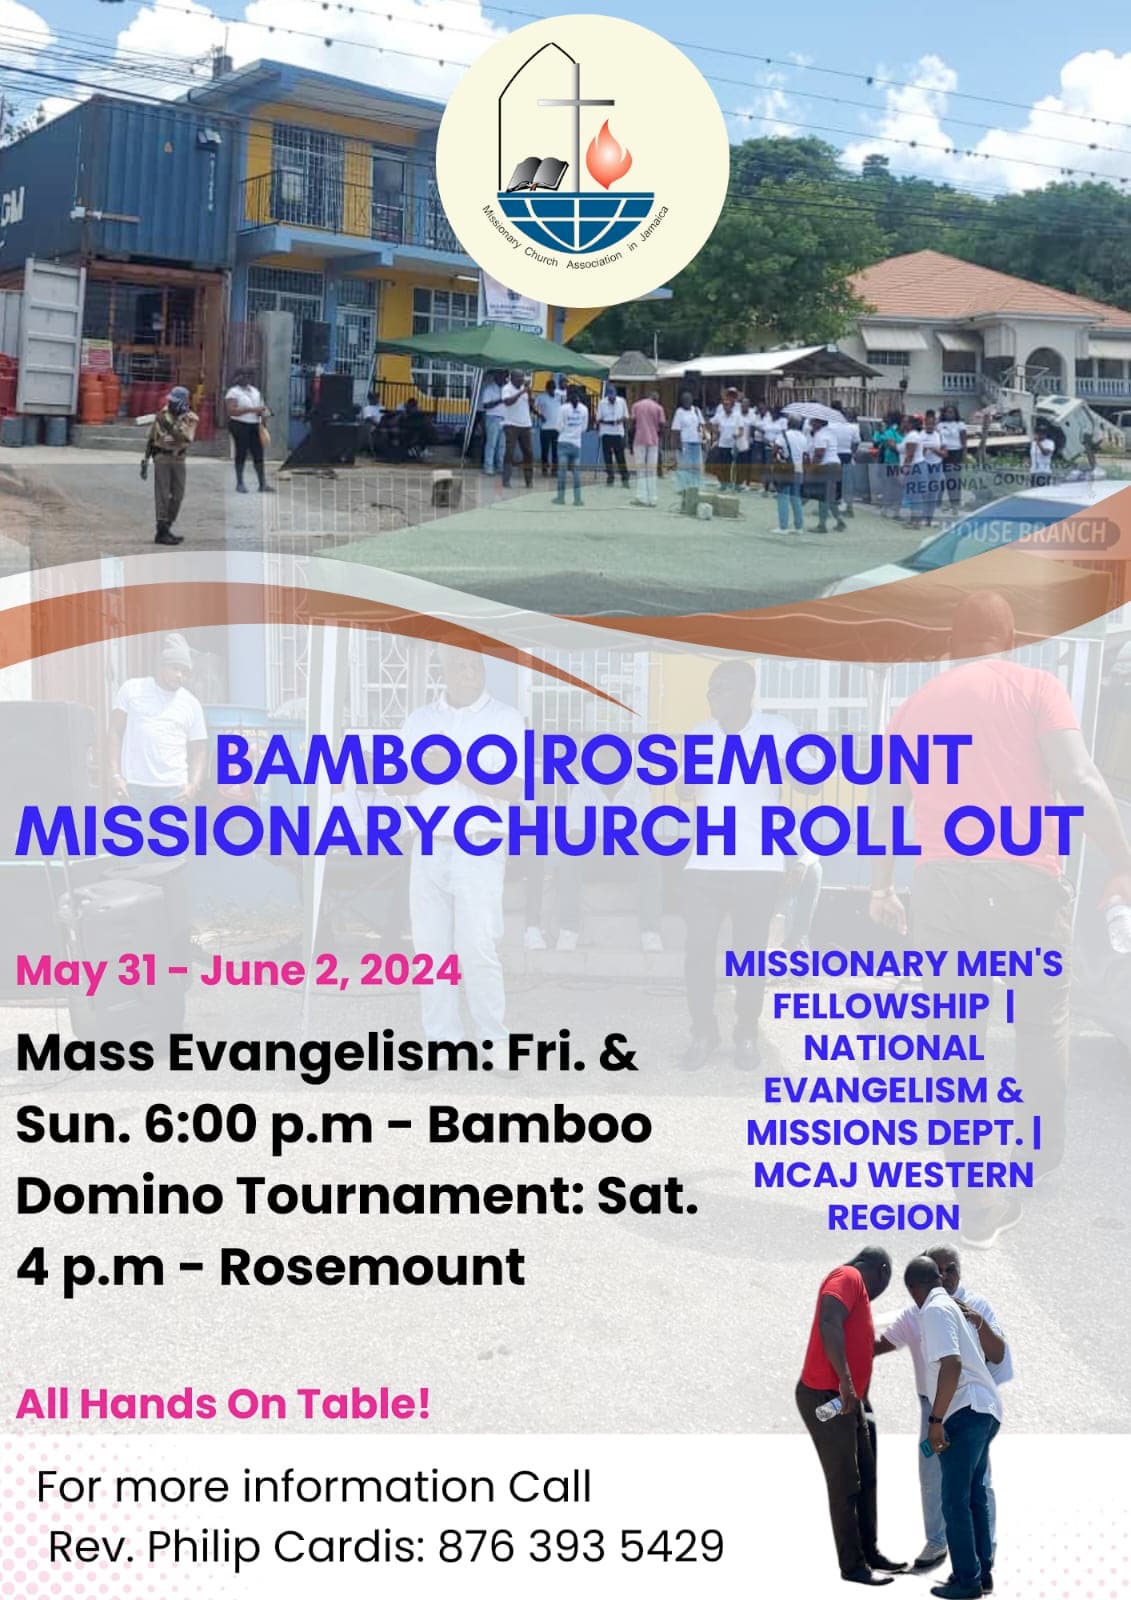 Bamboo Roll Out Flyer